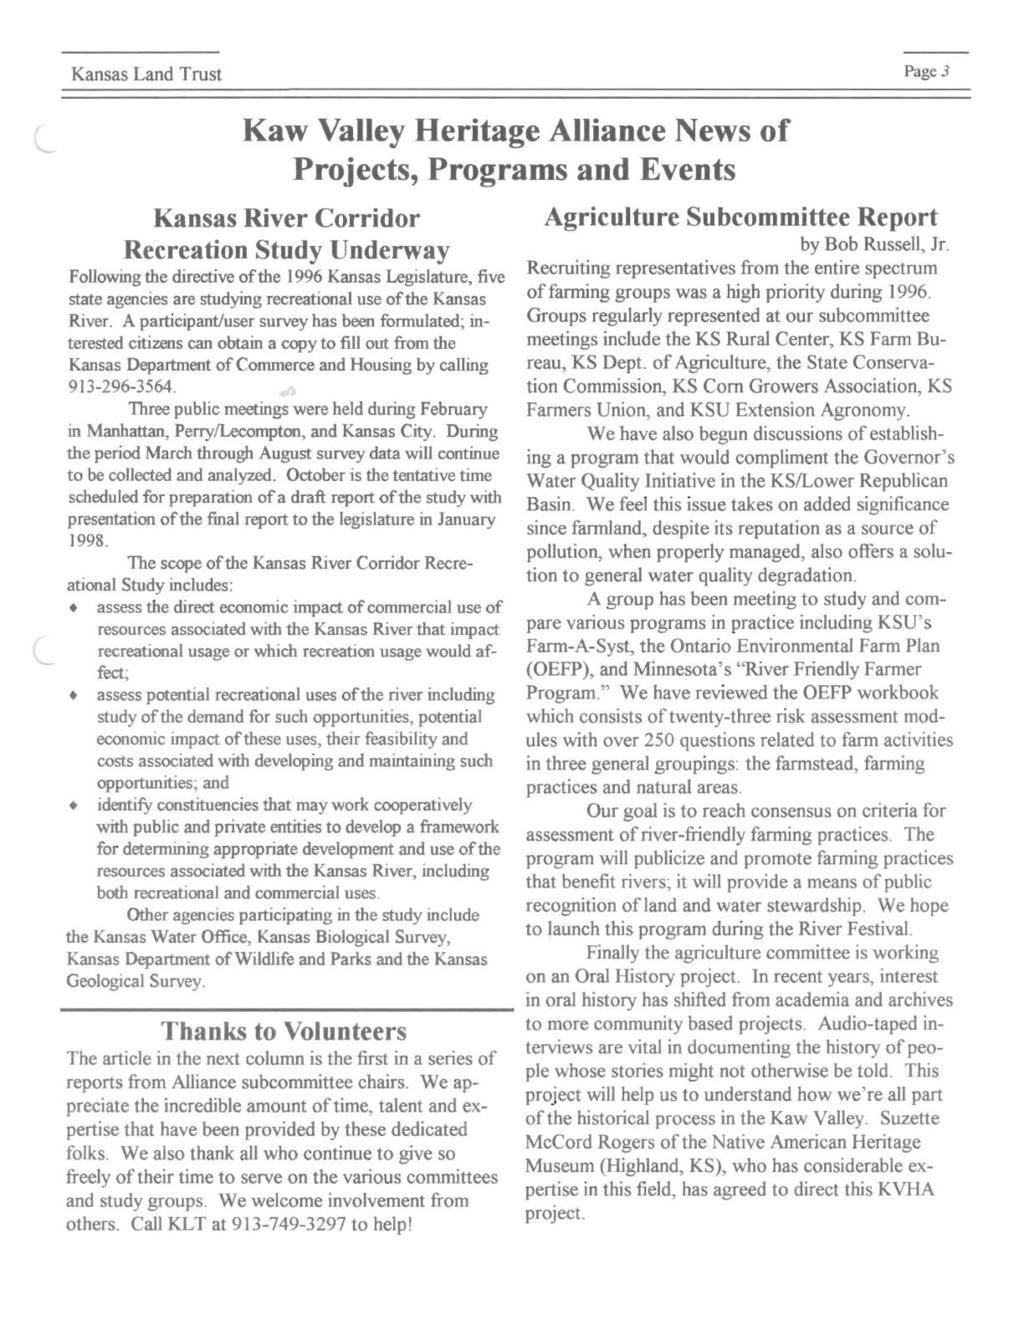 Kansas Land Trust Page 3 Kaw Valley Heritage Alliance News of Projects, Programs and Events Kansas River Corridor Recreation Study Underway Following the directive of the 1996 Kansas Legislature,